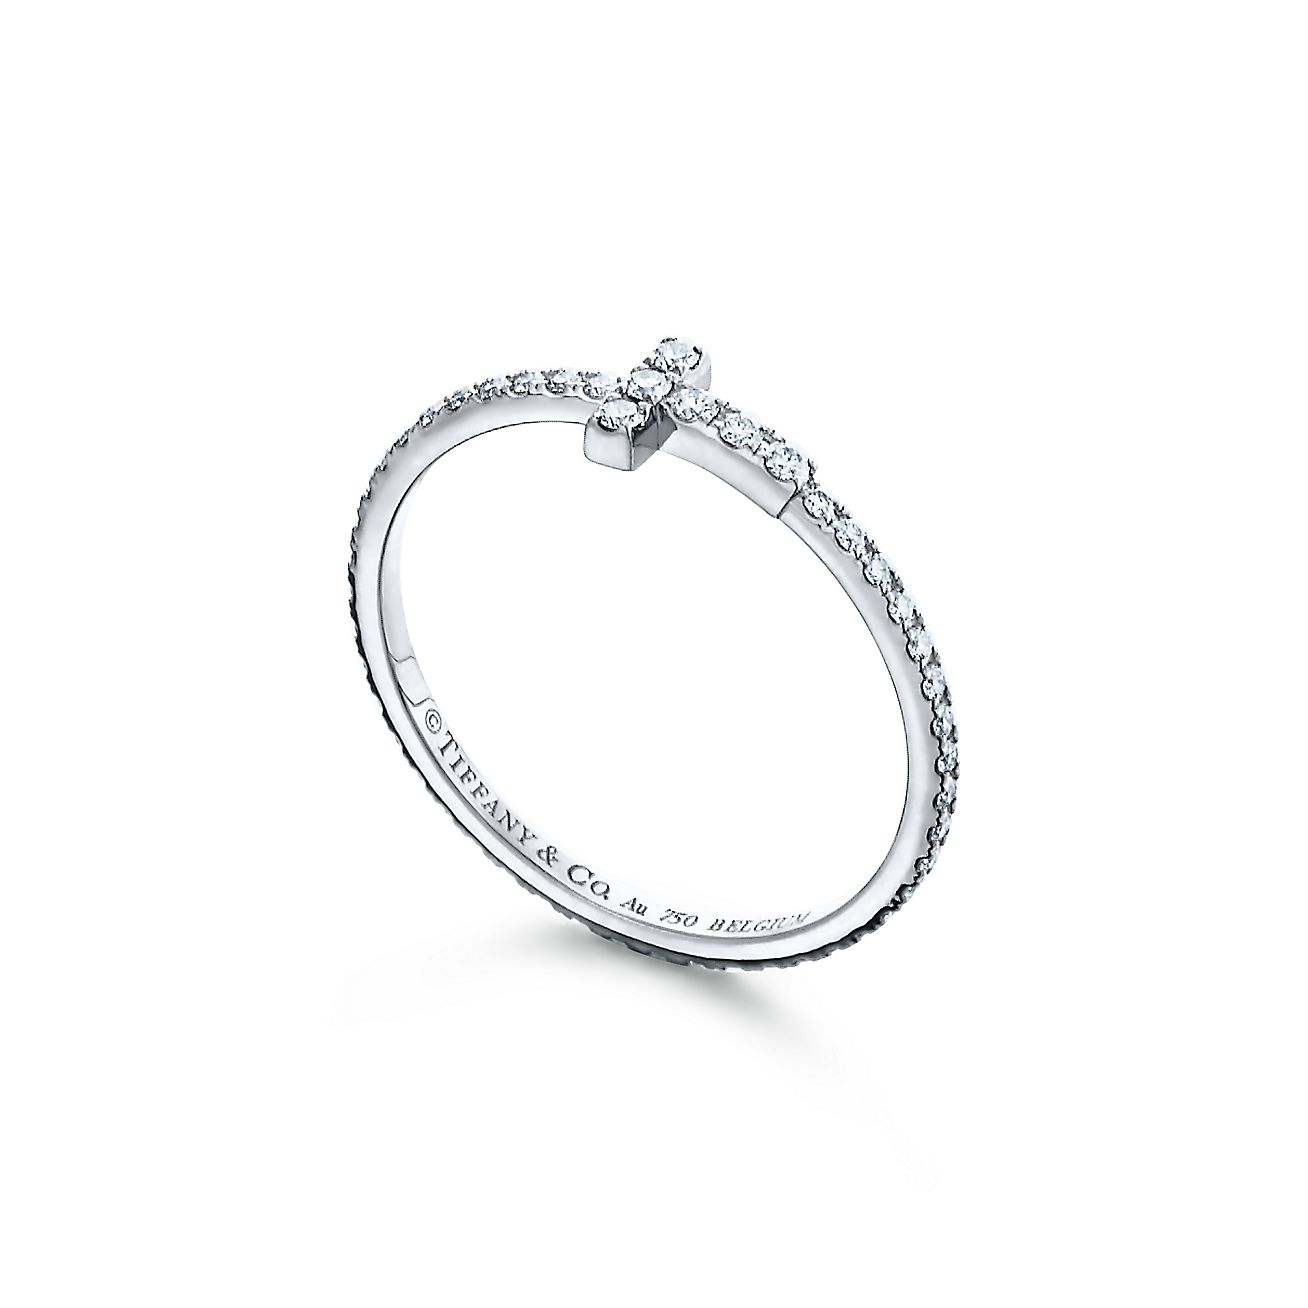 T diamond wire band ring